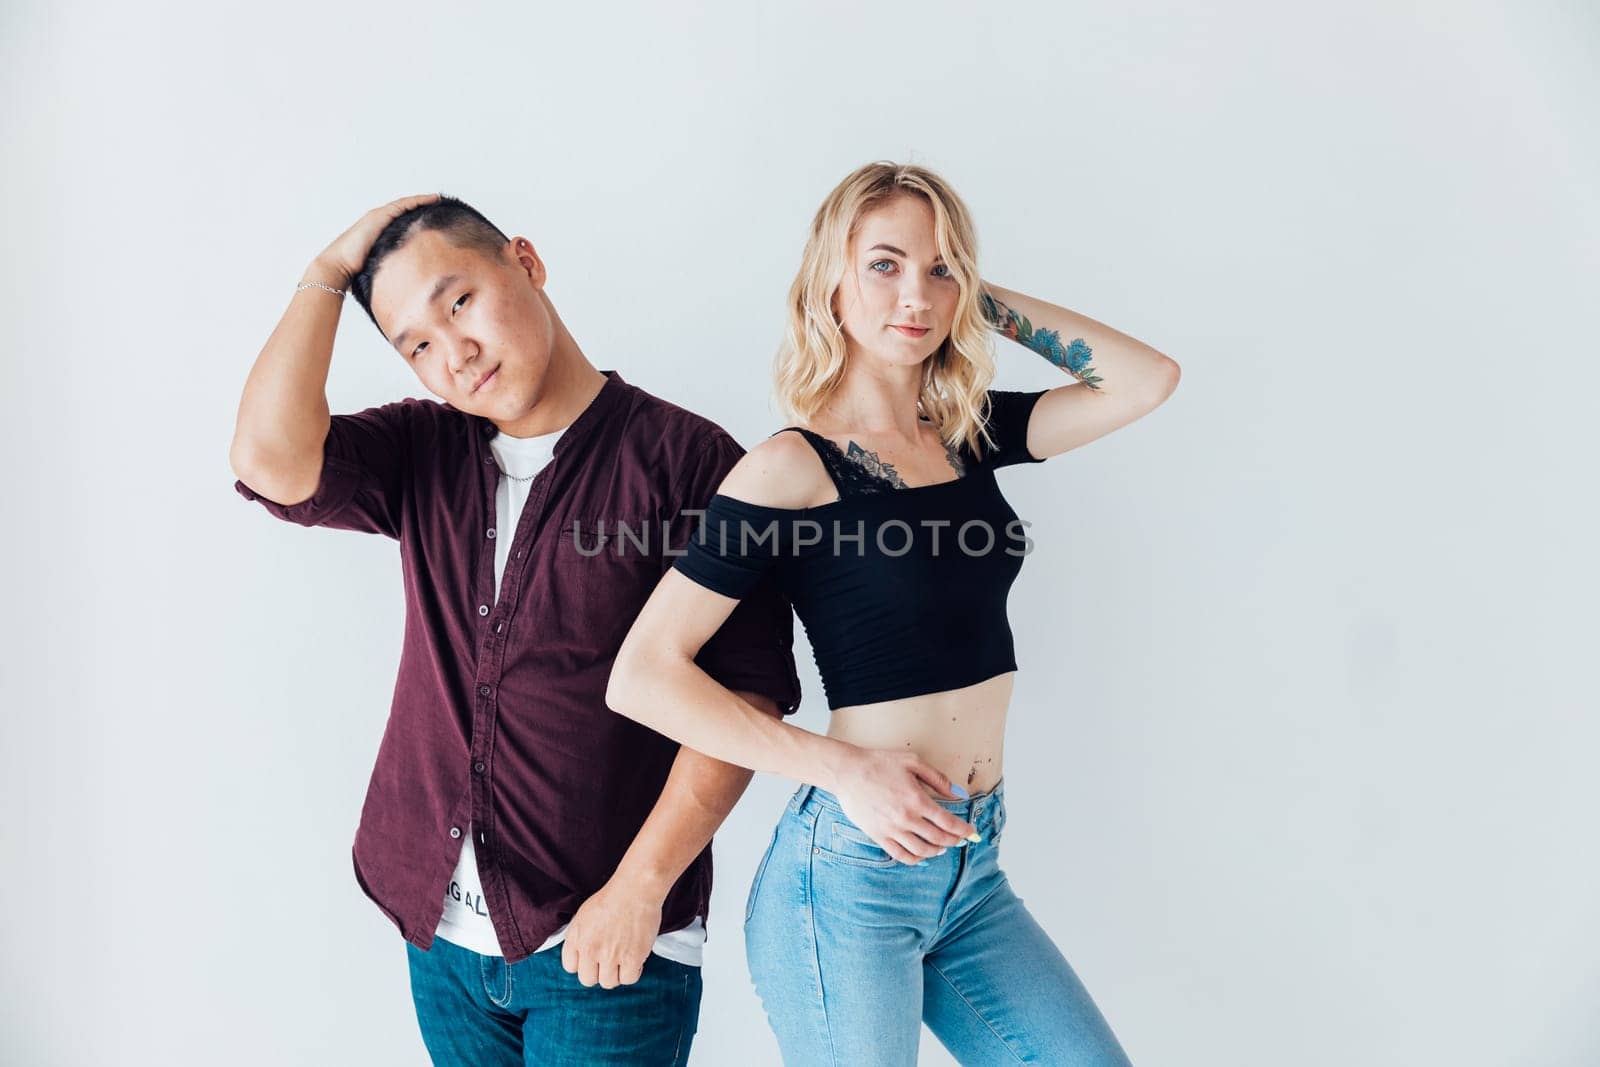 Man and woman posing on white background